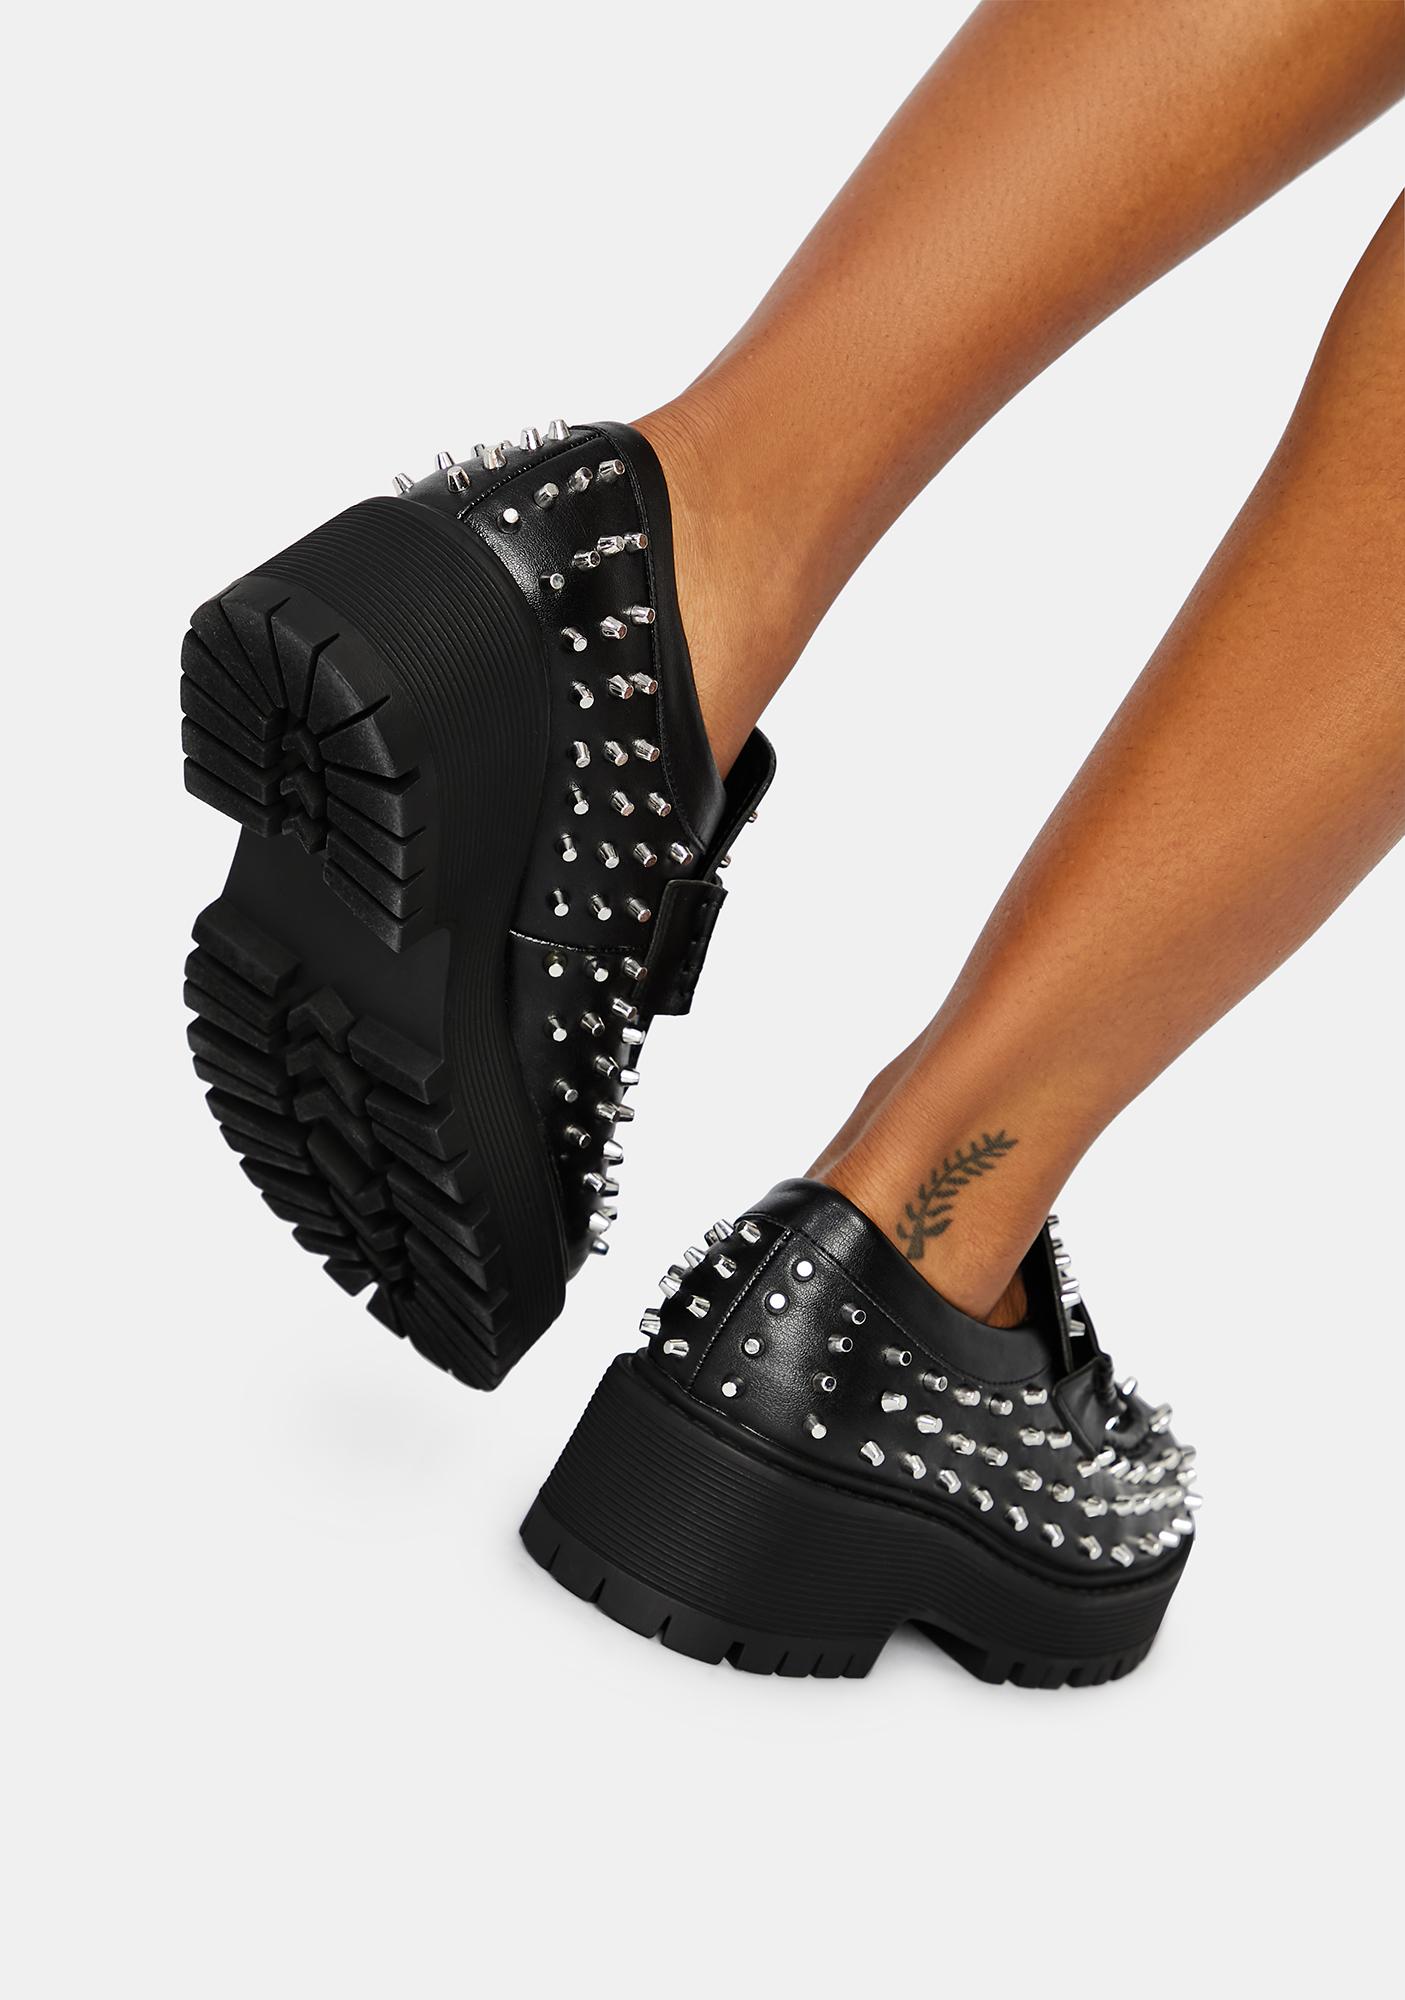 steve madden spiked sneakers